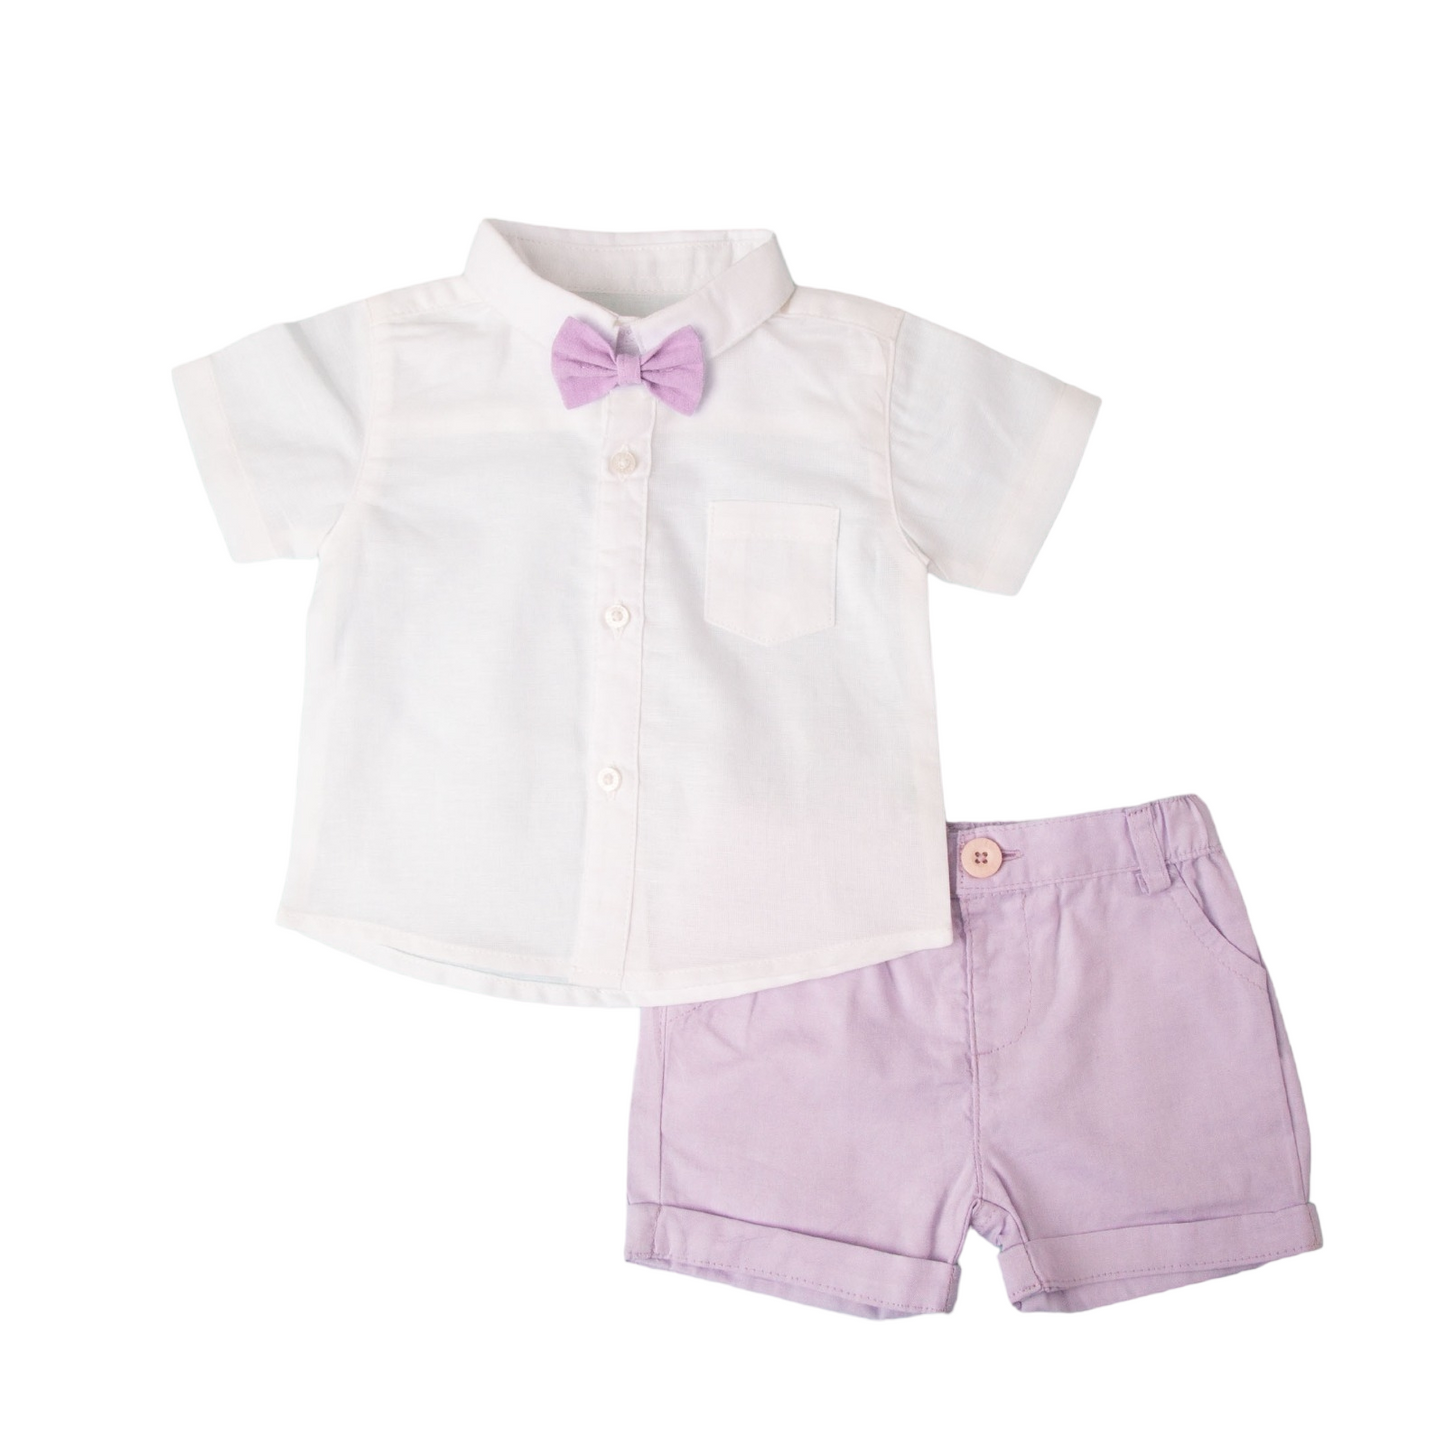 White Shirt & Purple Short with Bow